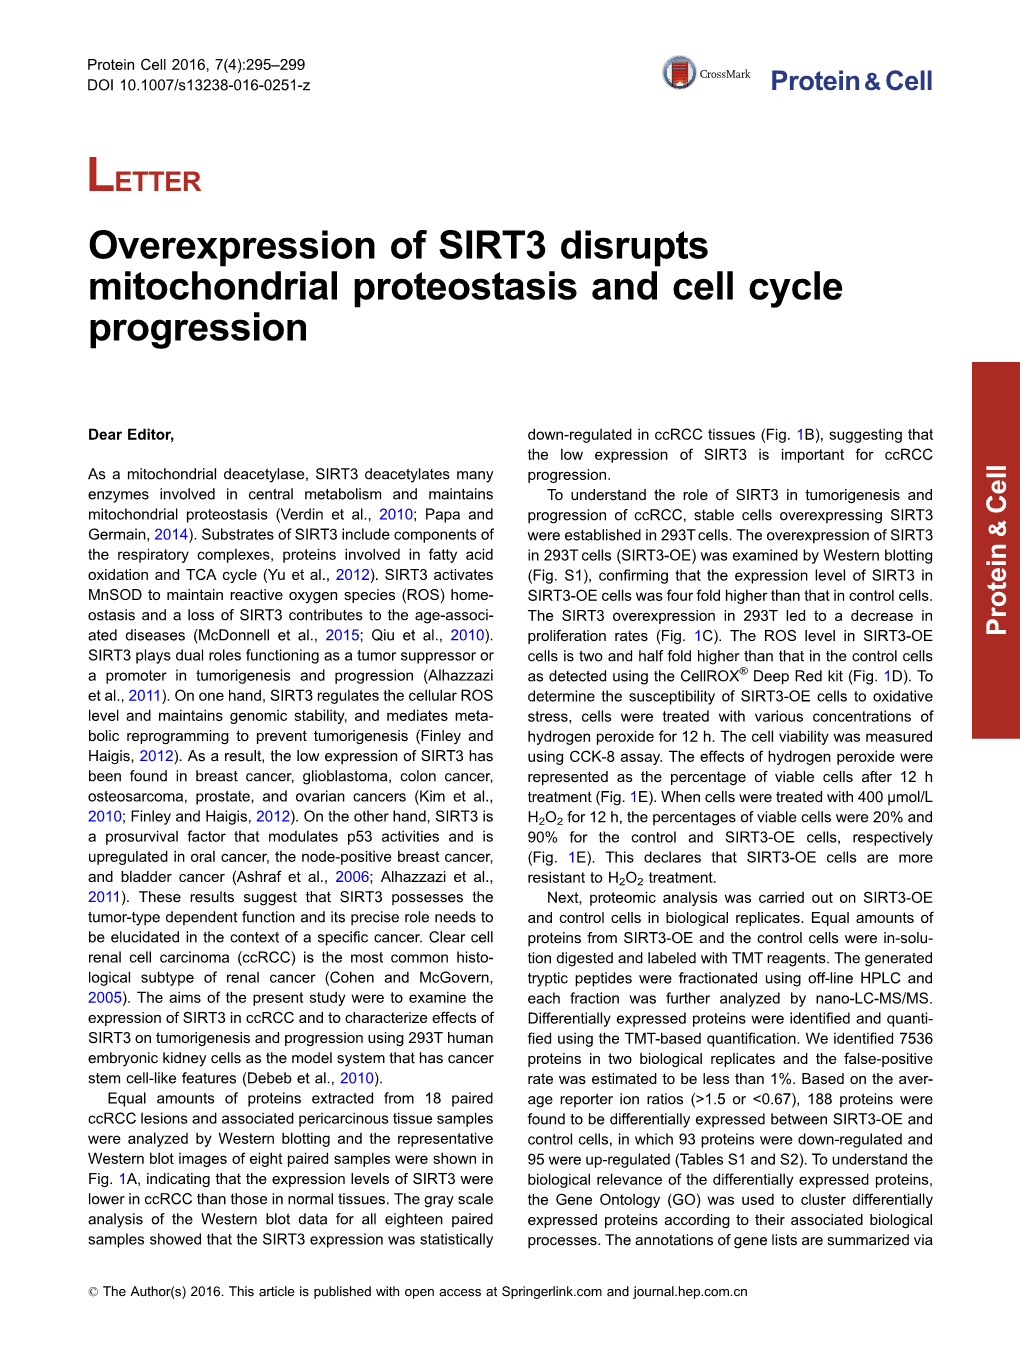 Overexpression of SIRT3 Disrupts Mitochondrial Proteostasis and Cell Cycle Progression